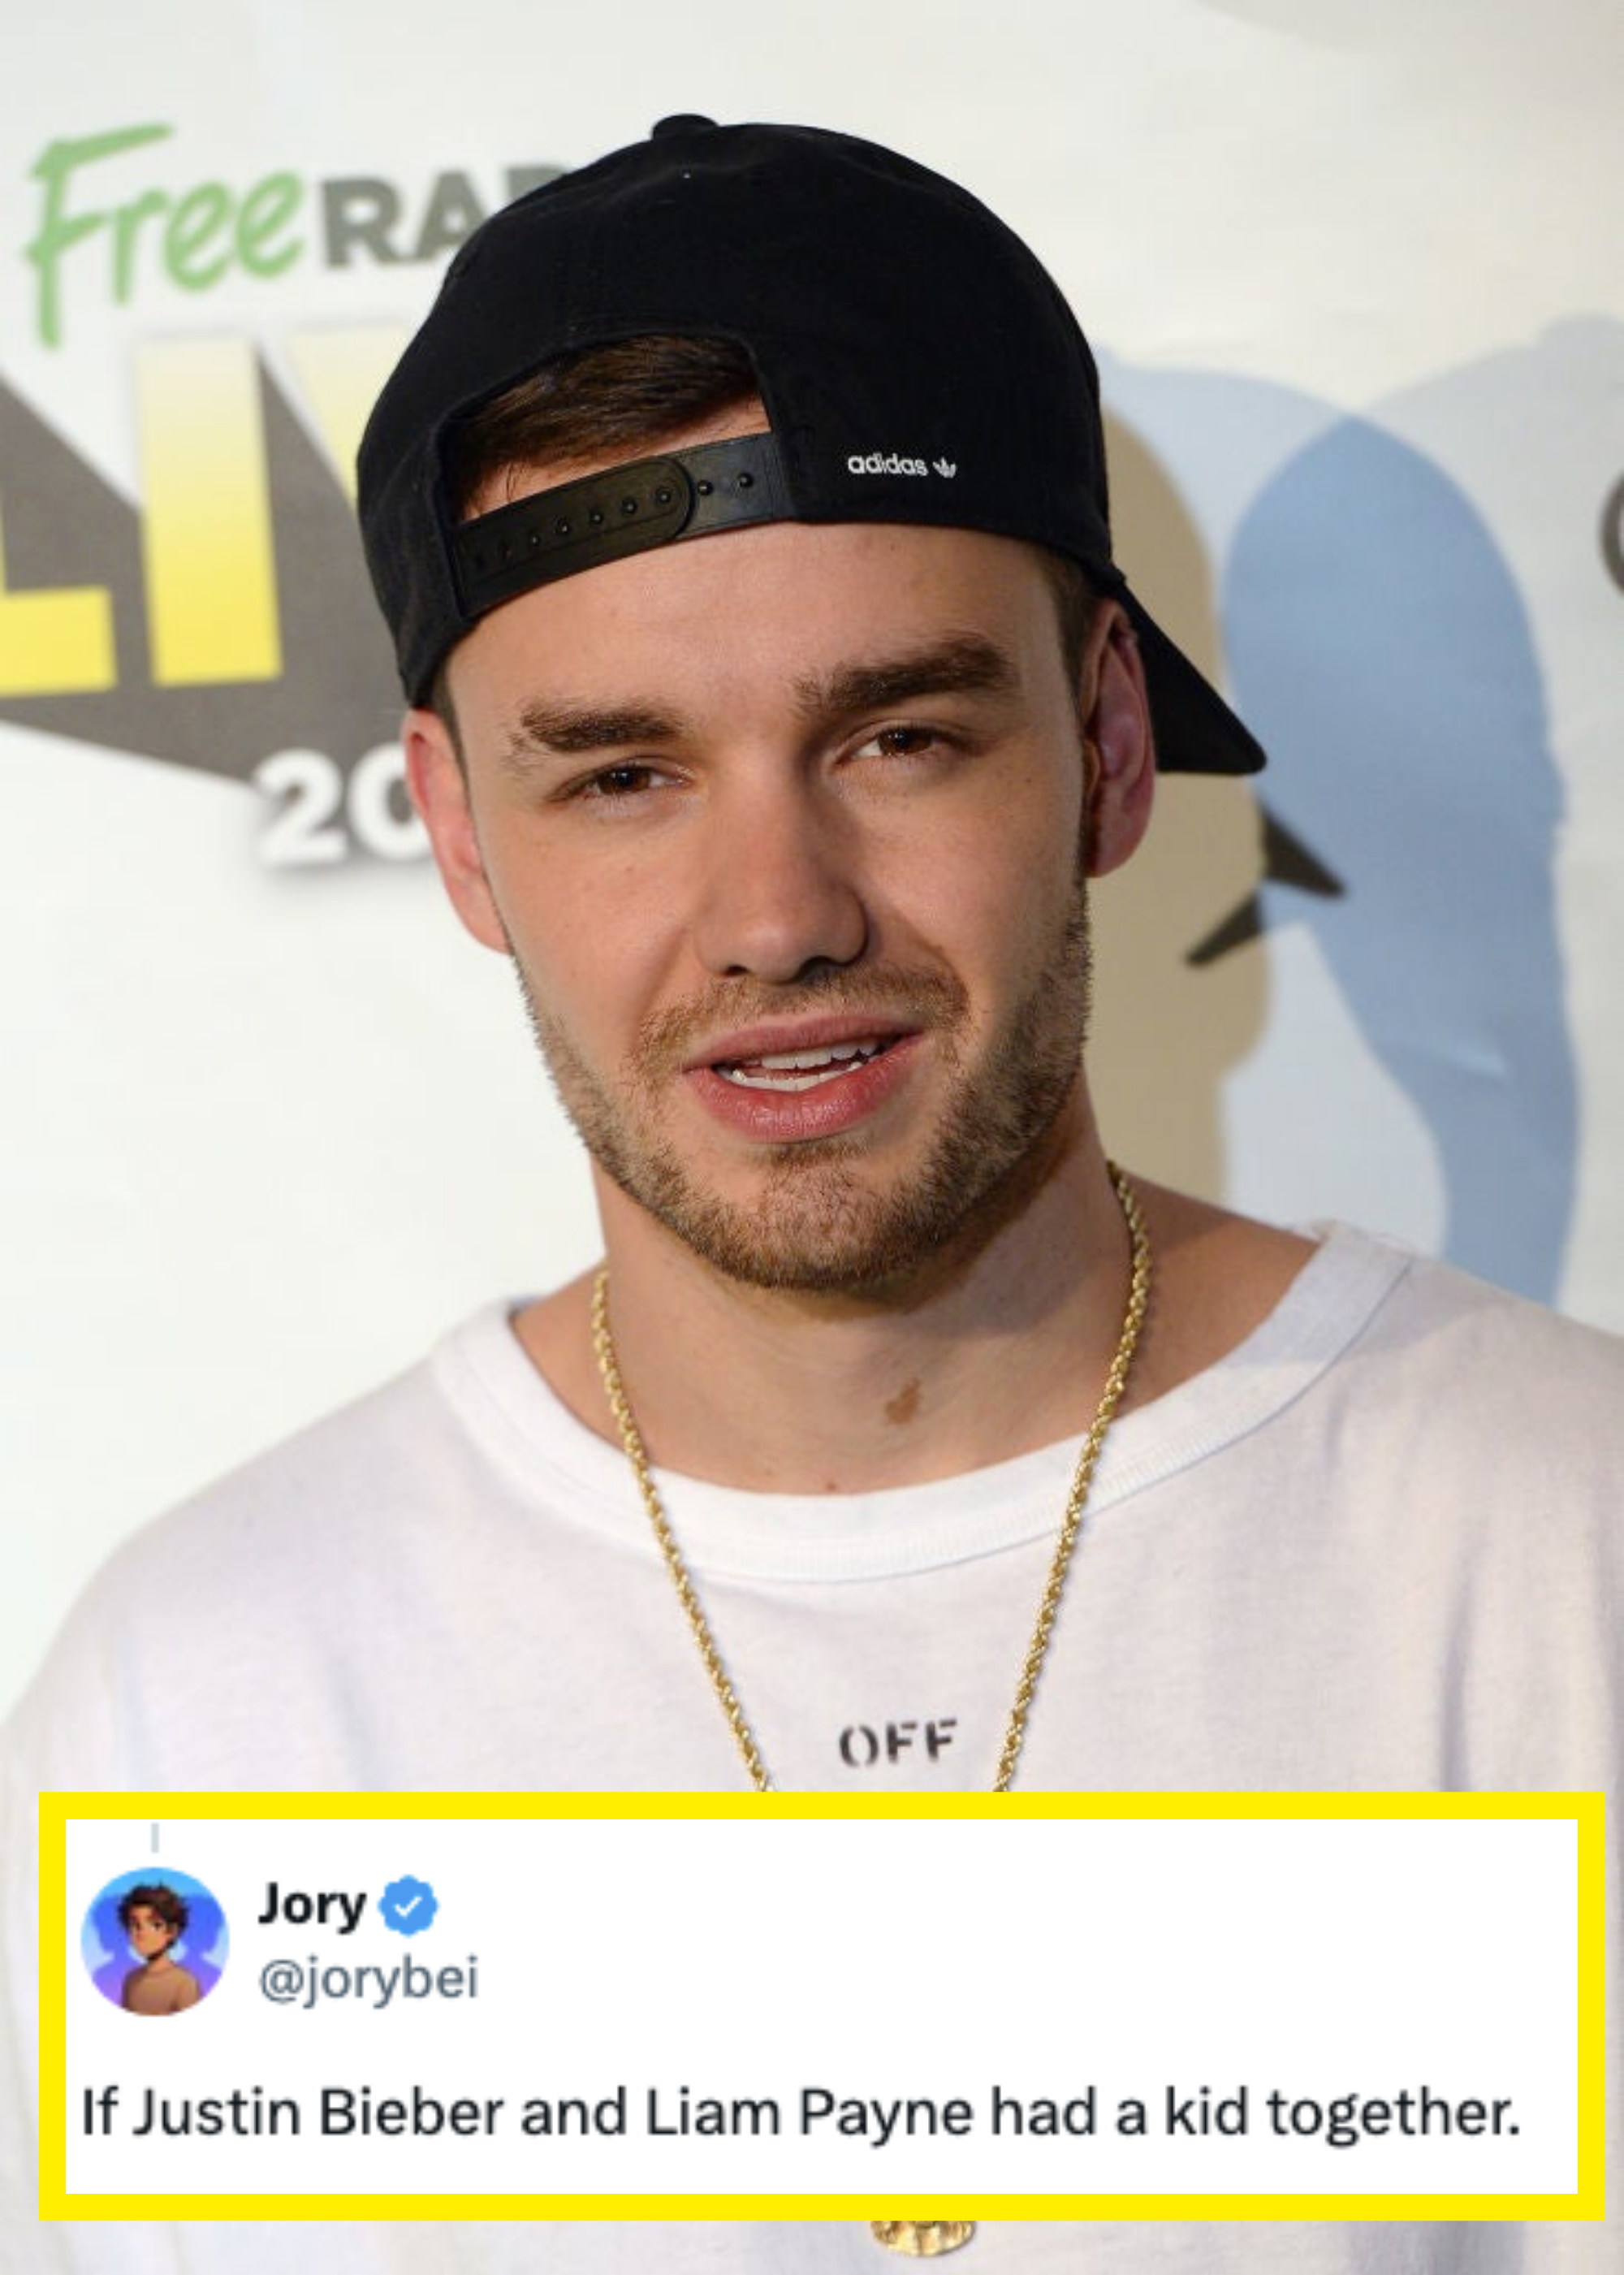 Liam Payne wearing a cap, casual shirt, and chain, with a tweet overlay joking about a resemblance